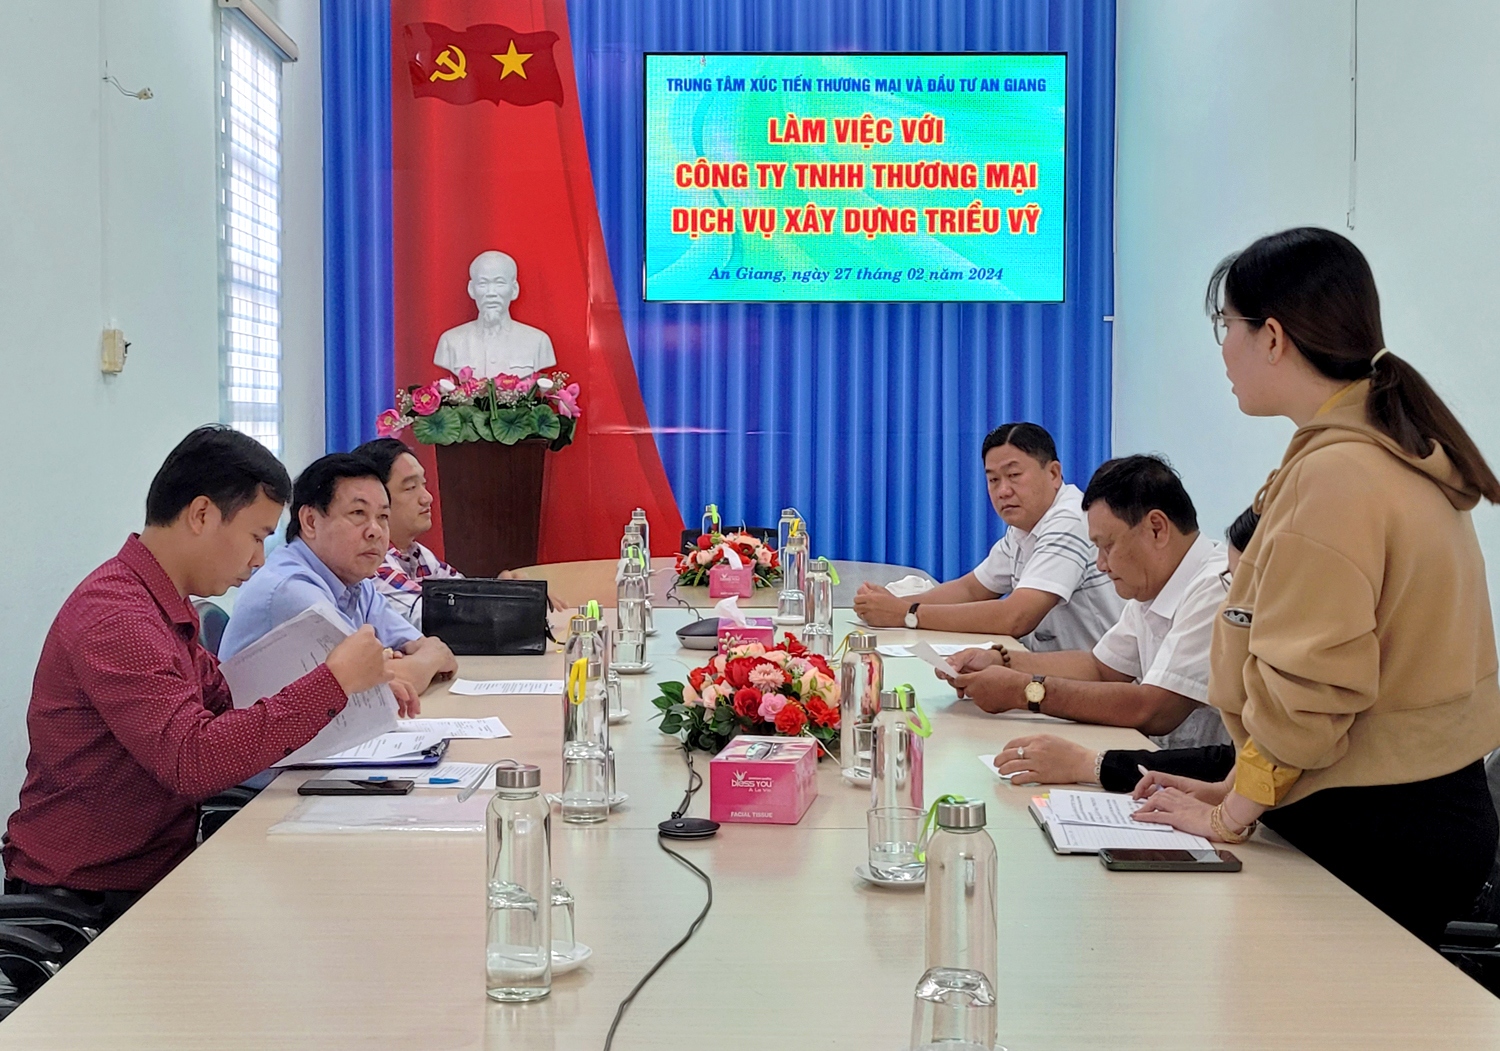 Connecting businesses to invest in An Giang Tourism